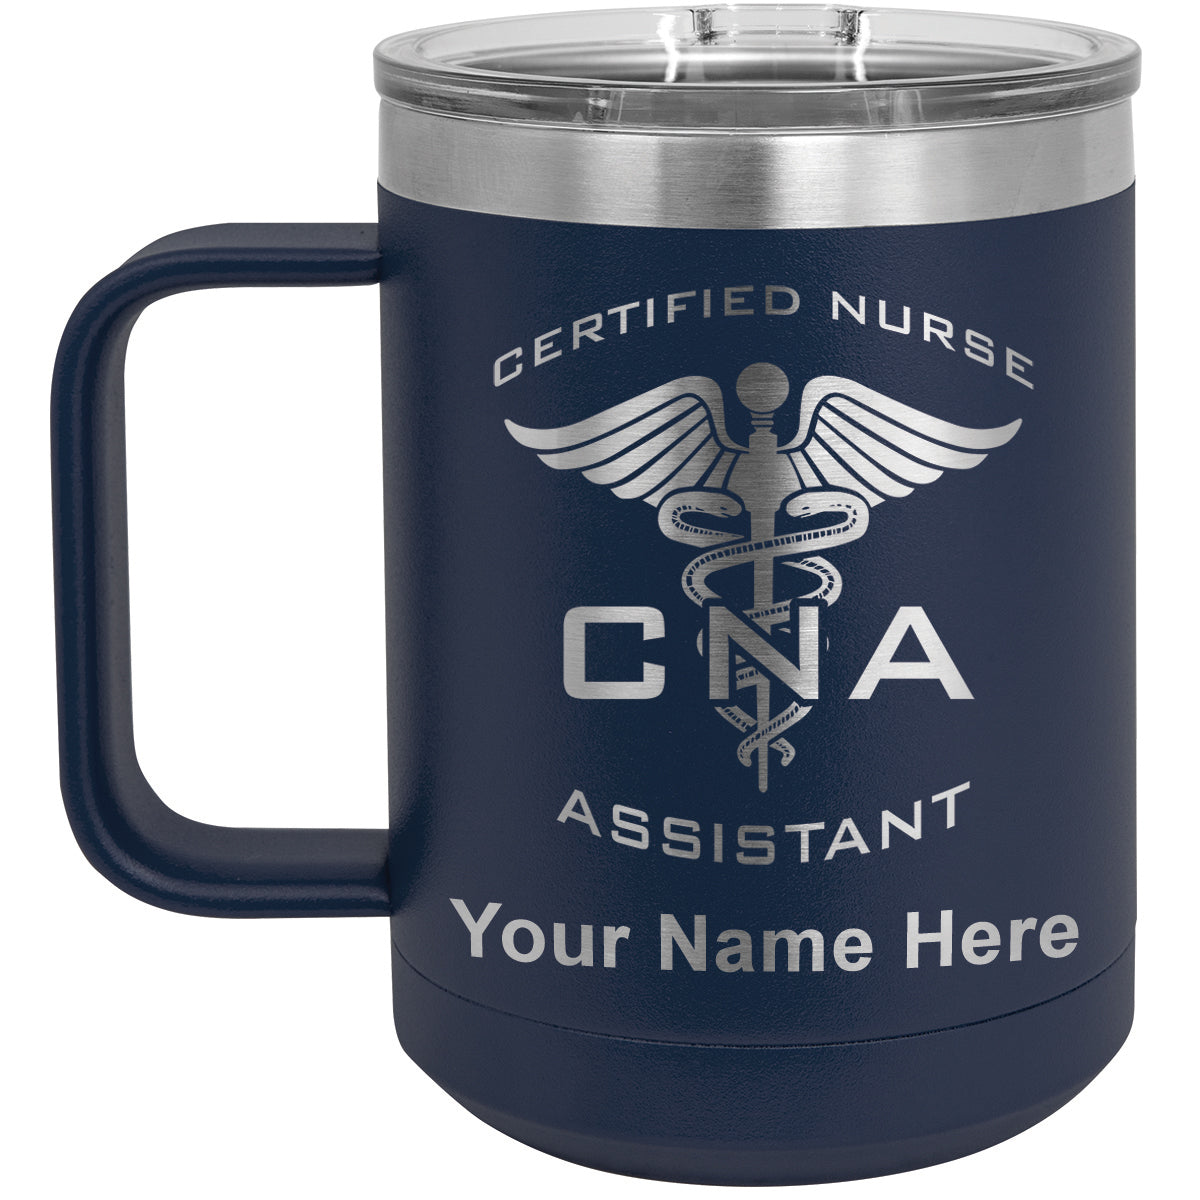 15oz Vacuum Insulated Coffee Mug, CNA Certified Nurse Assistant, Personalized Engraving Included